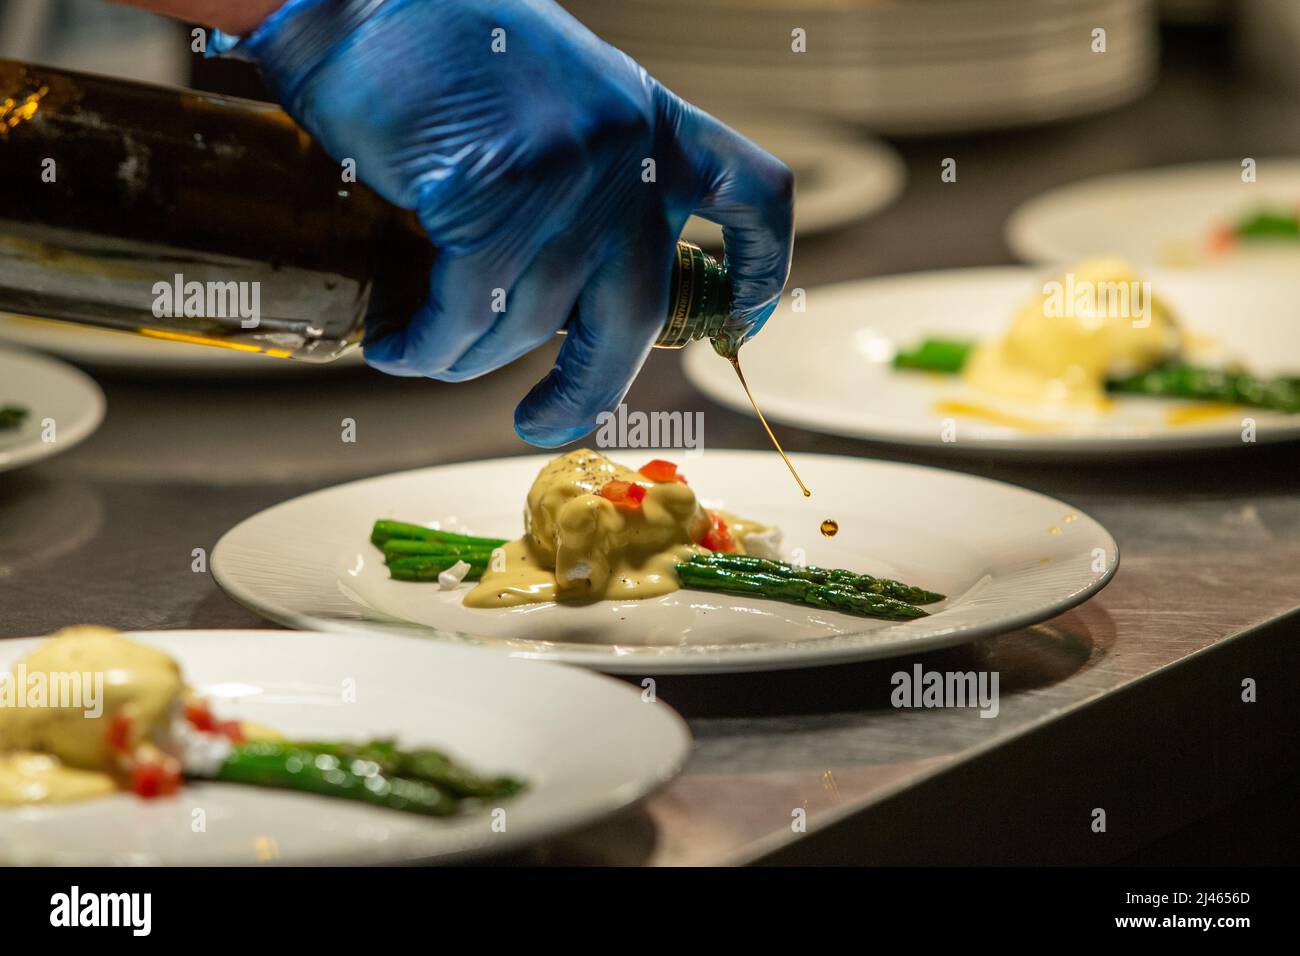 Olive oil being drizzled on gourmet food during plating up. Stock Photo